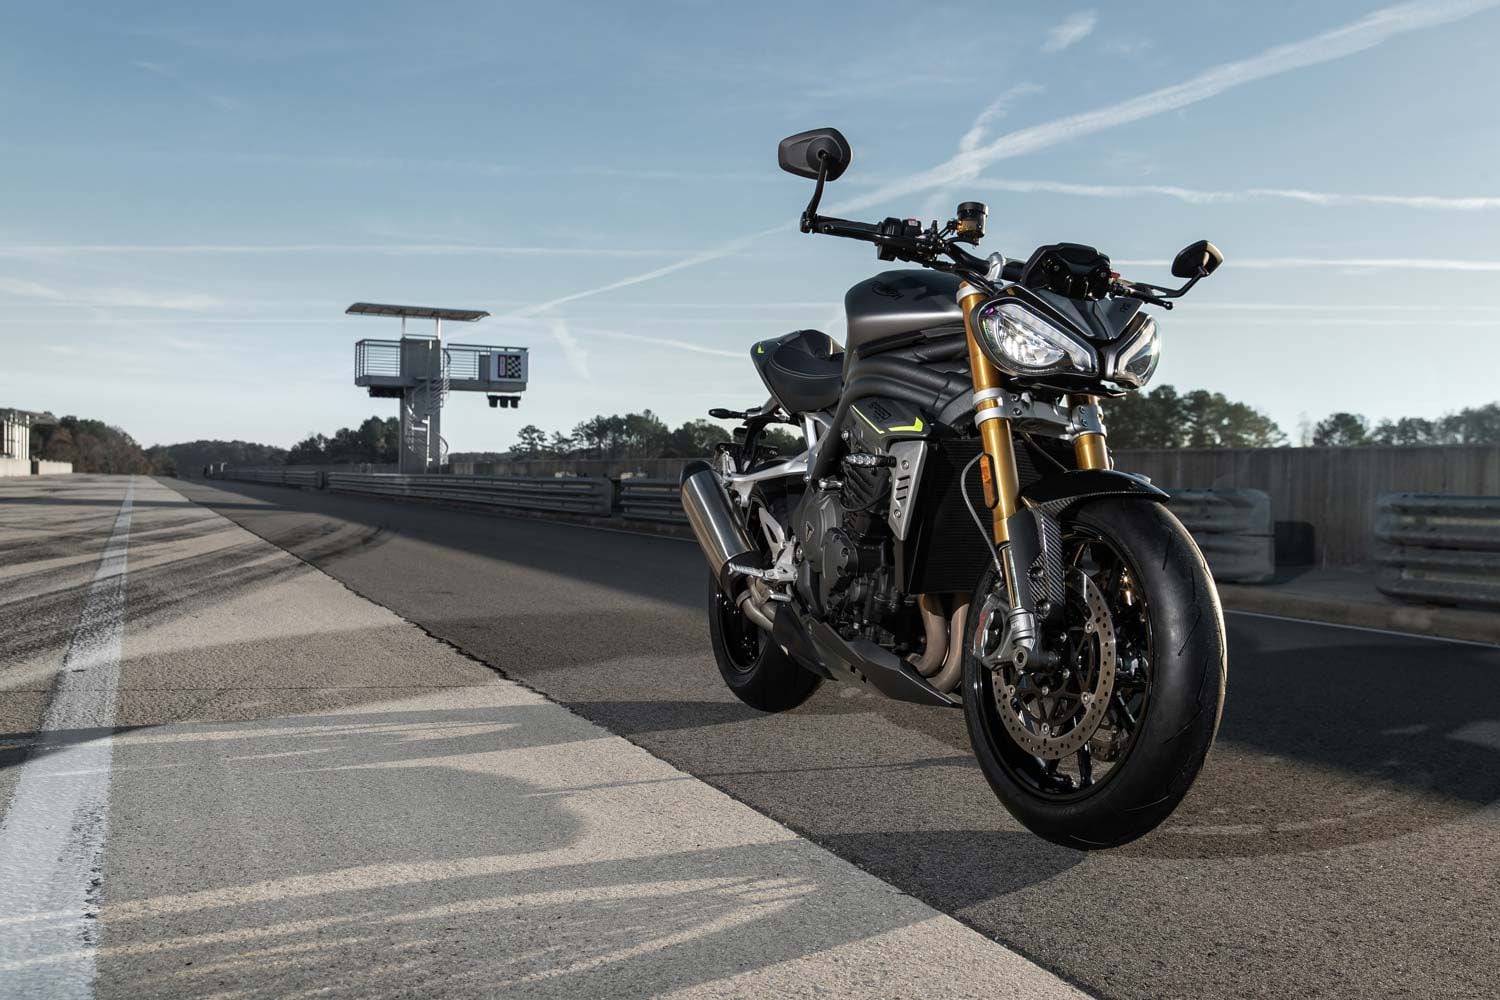 We swing a leg over Triumph’s Speed Triple 1200 RS in this motorcycle review.